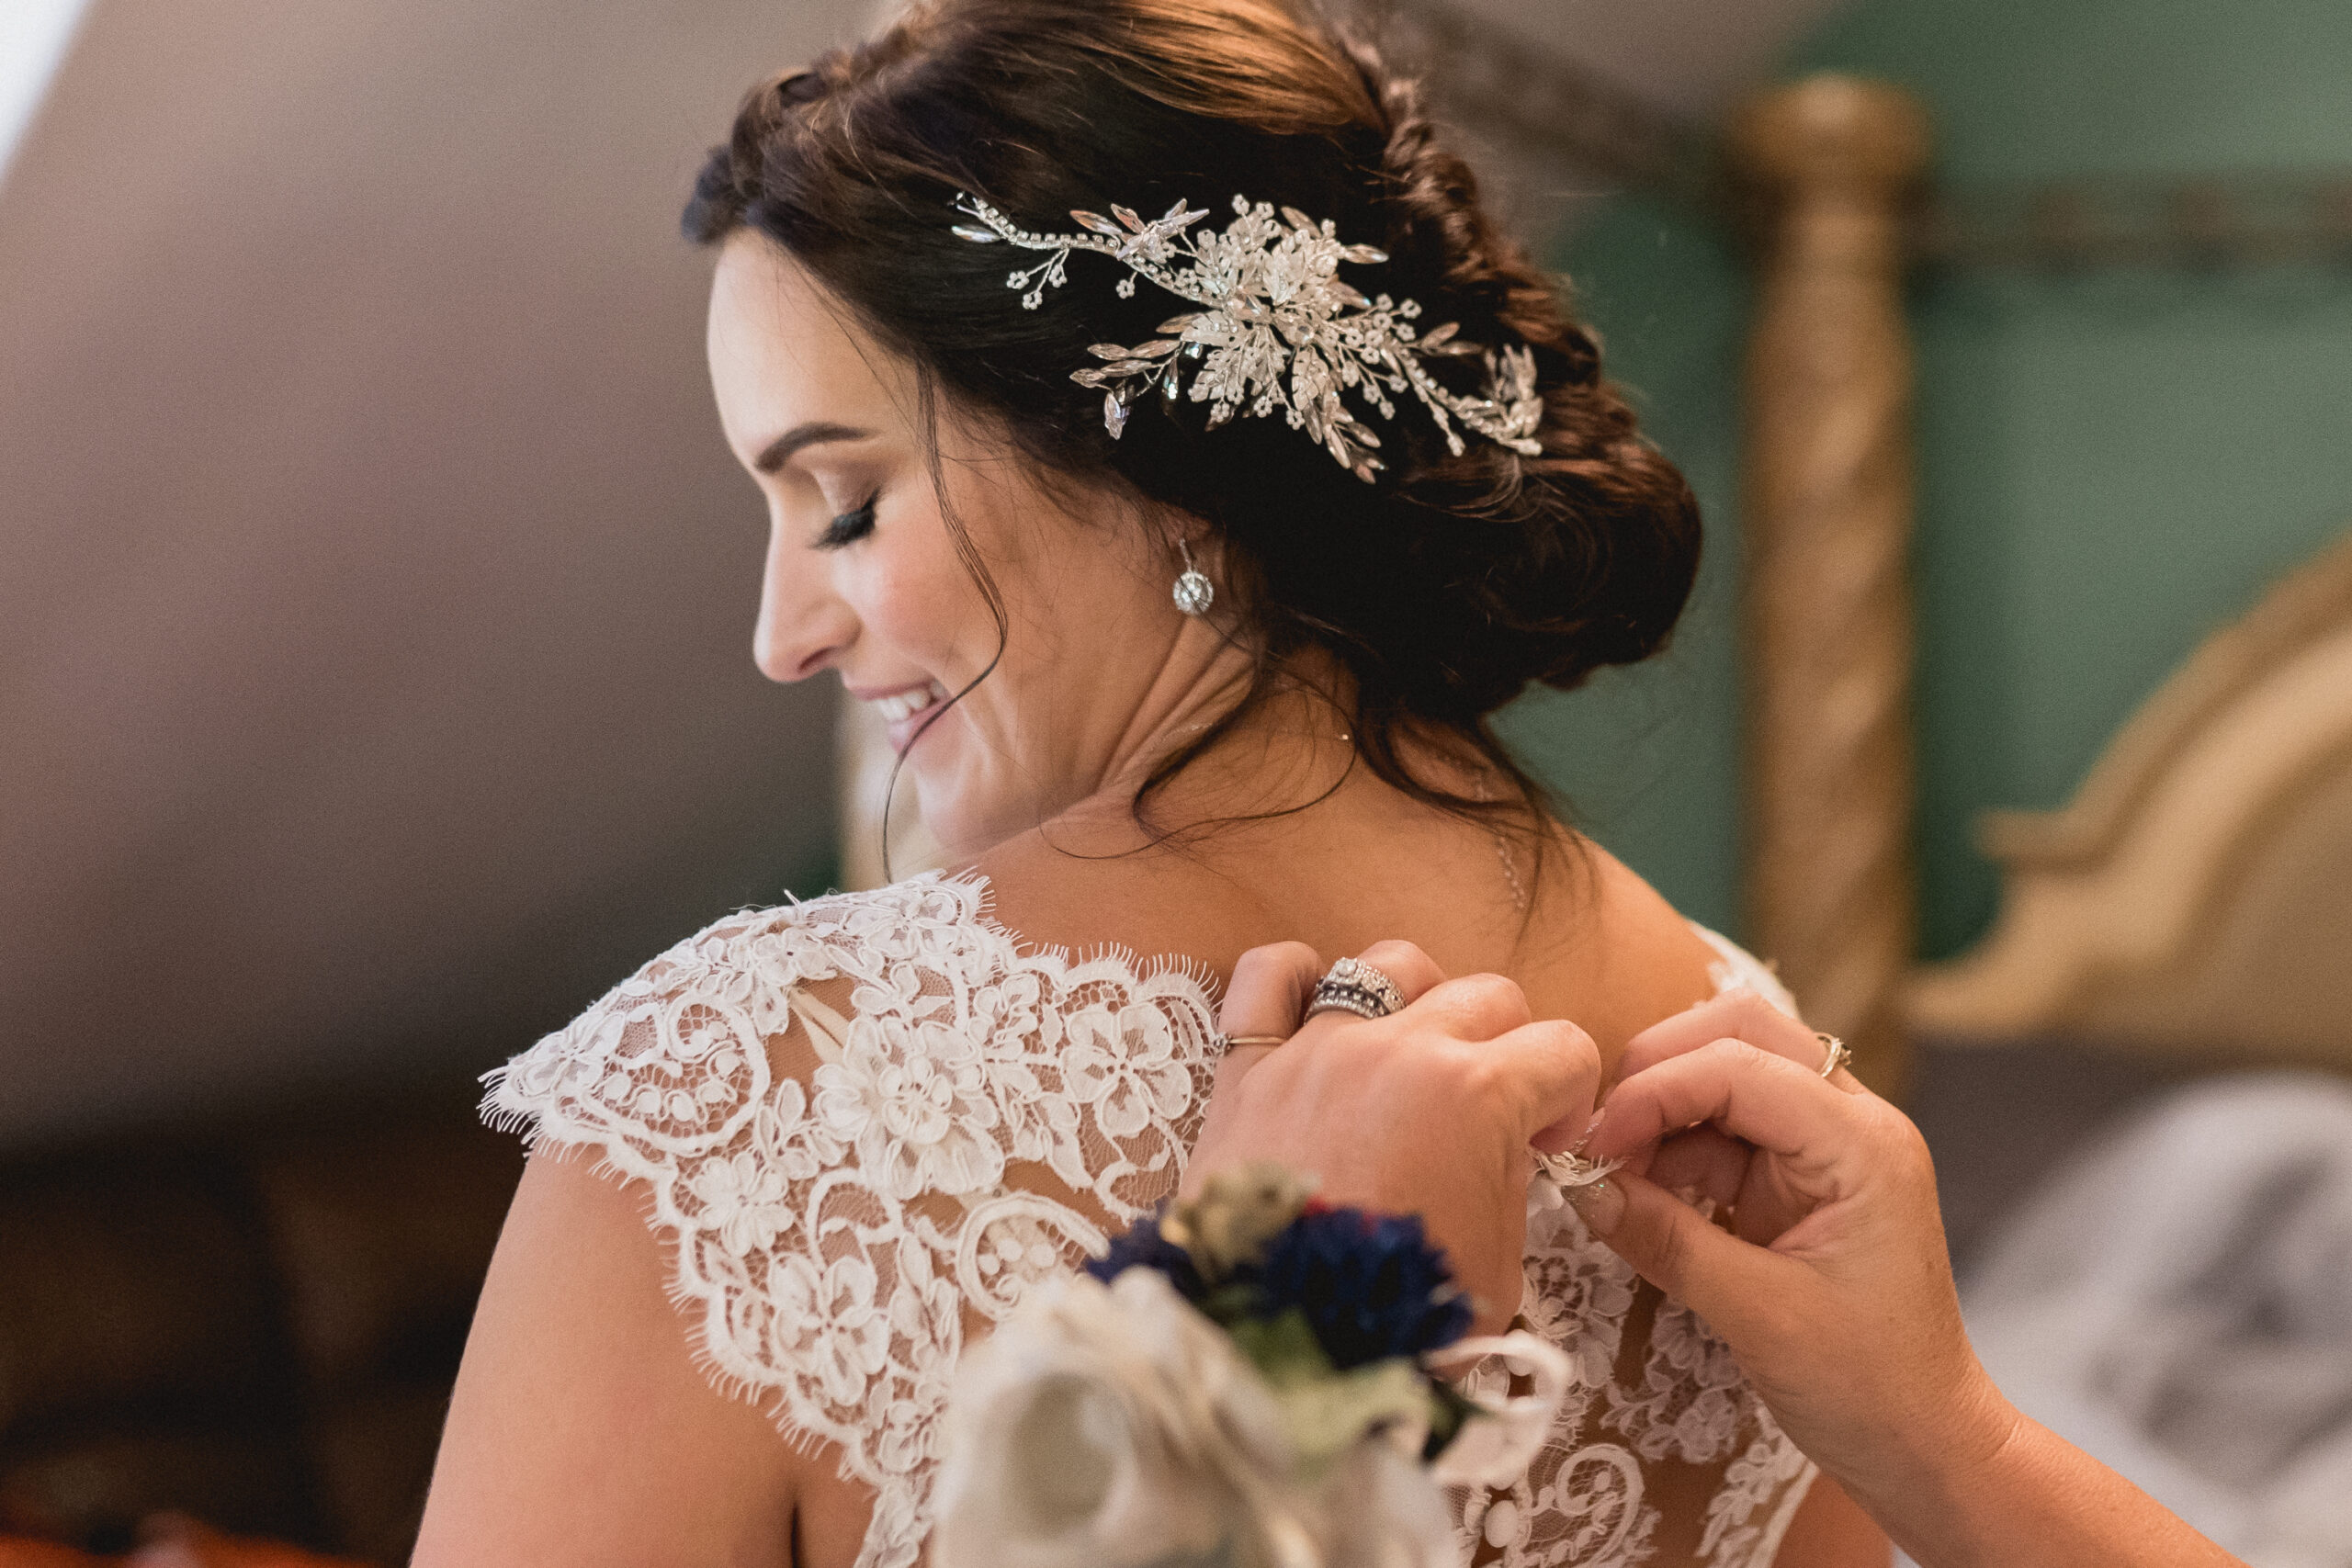 Bride smiling looking over shoulder, with her dark hair held back by a sparkling wedding comb, her wedding dress being done up